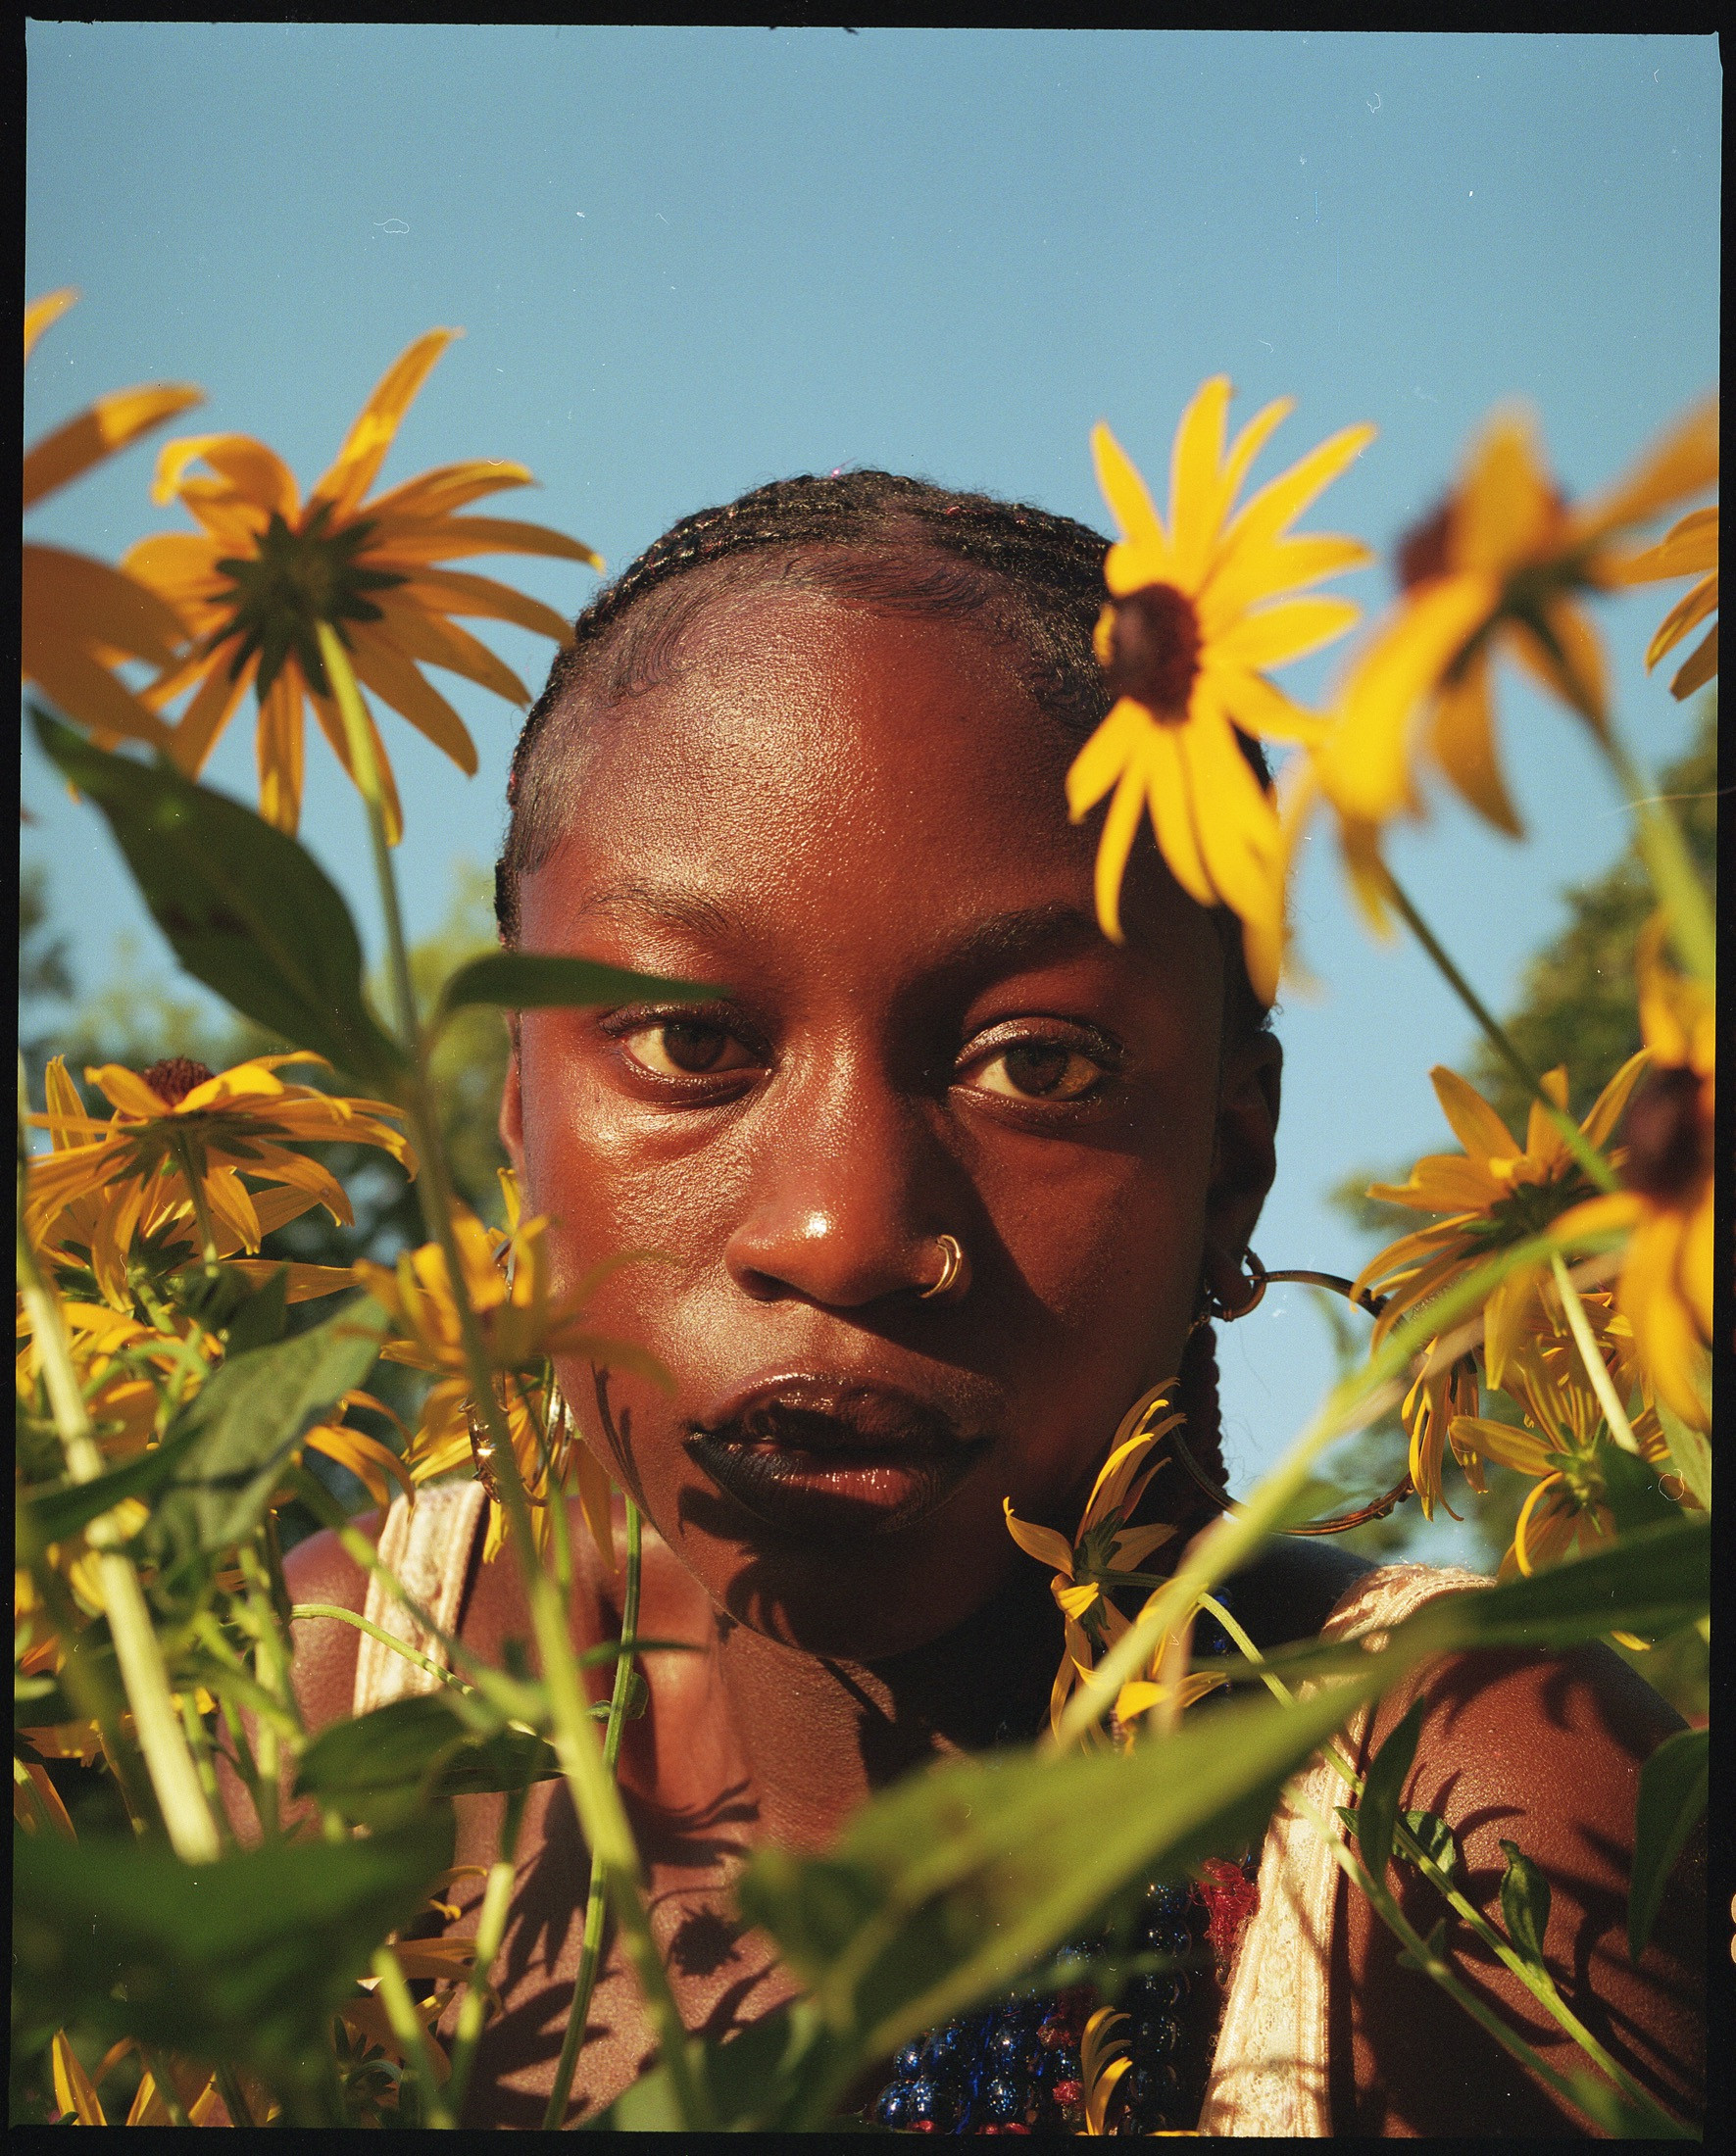 A closeup image of the face of a Black woman, photographed in a field of sunflowers in the golden late afternoon light.